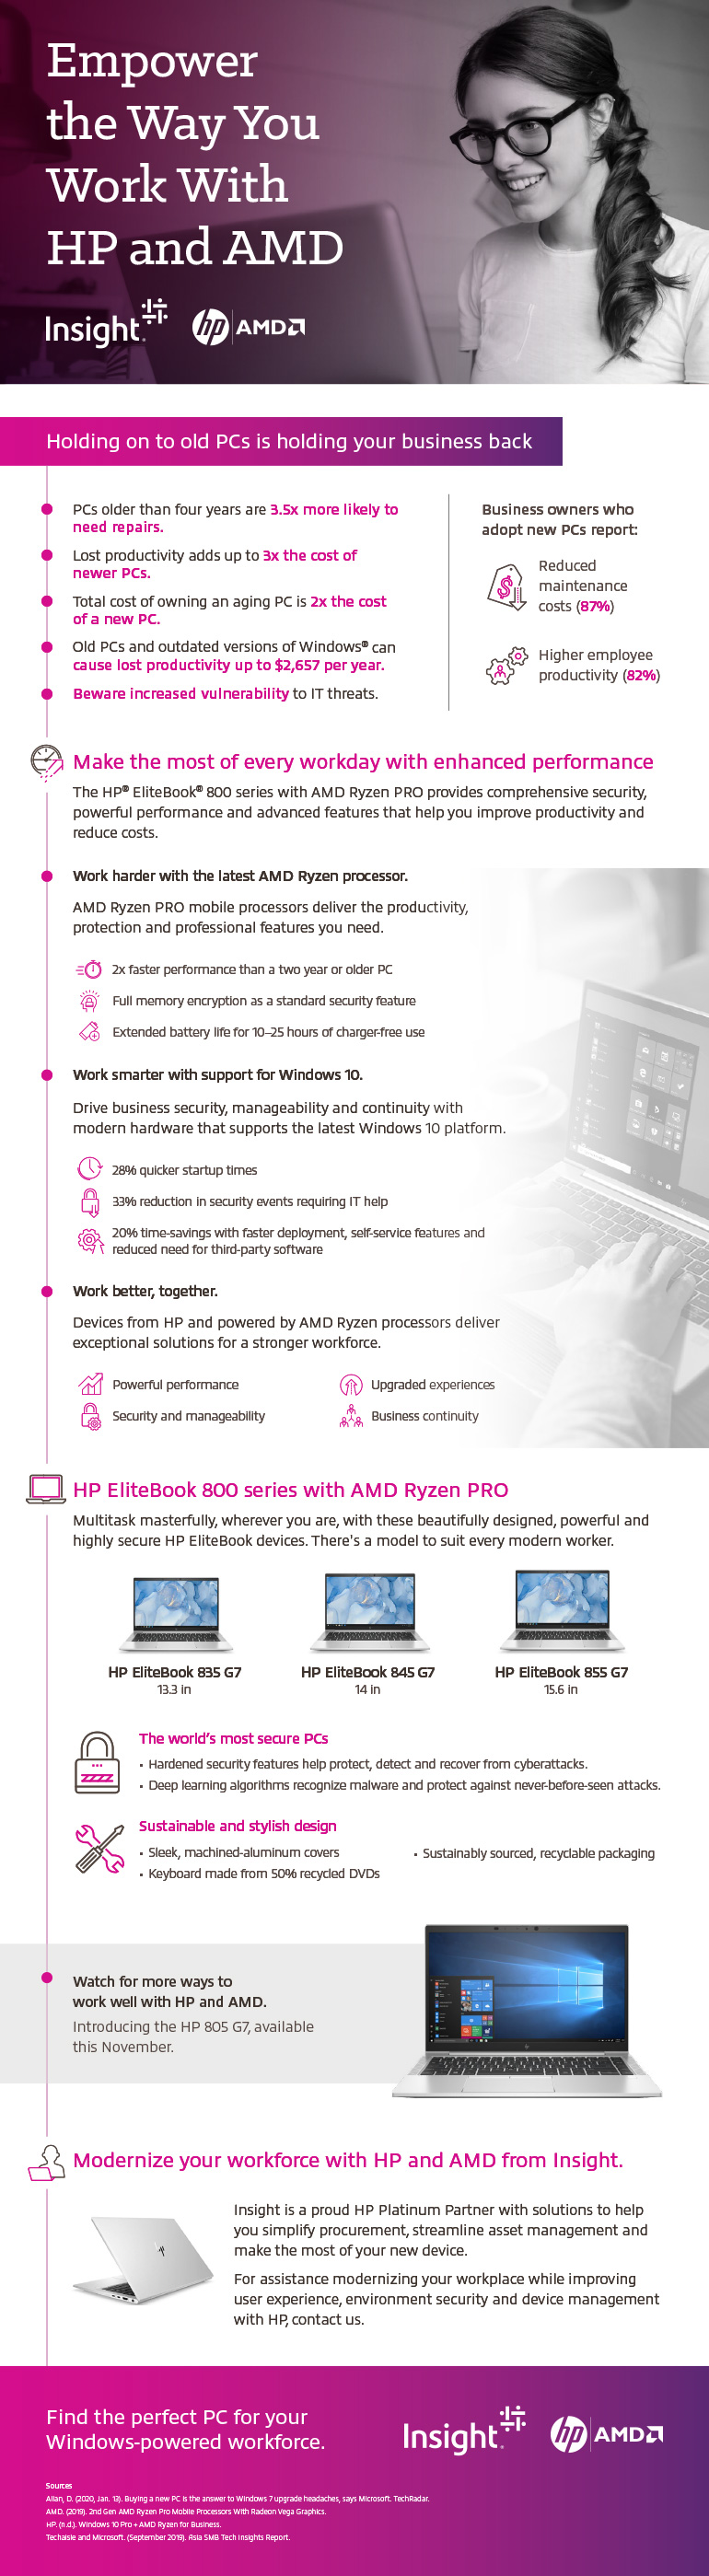 Empower the Way You Work With HP and AMD